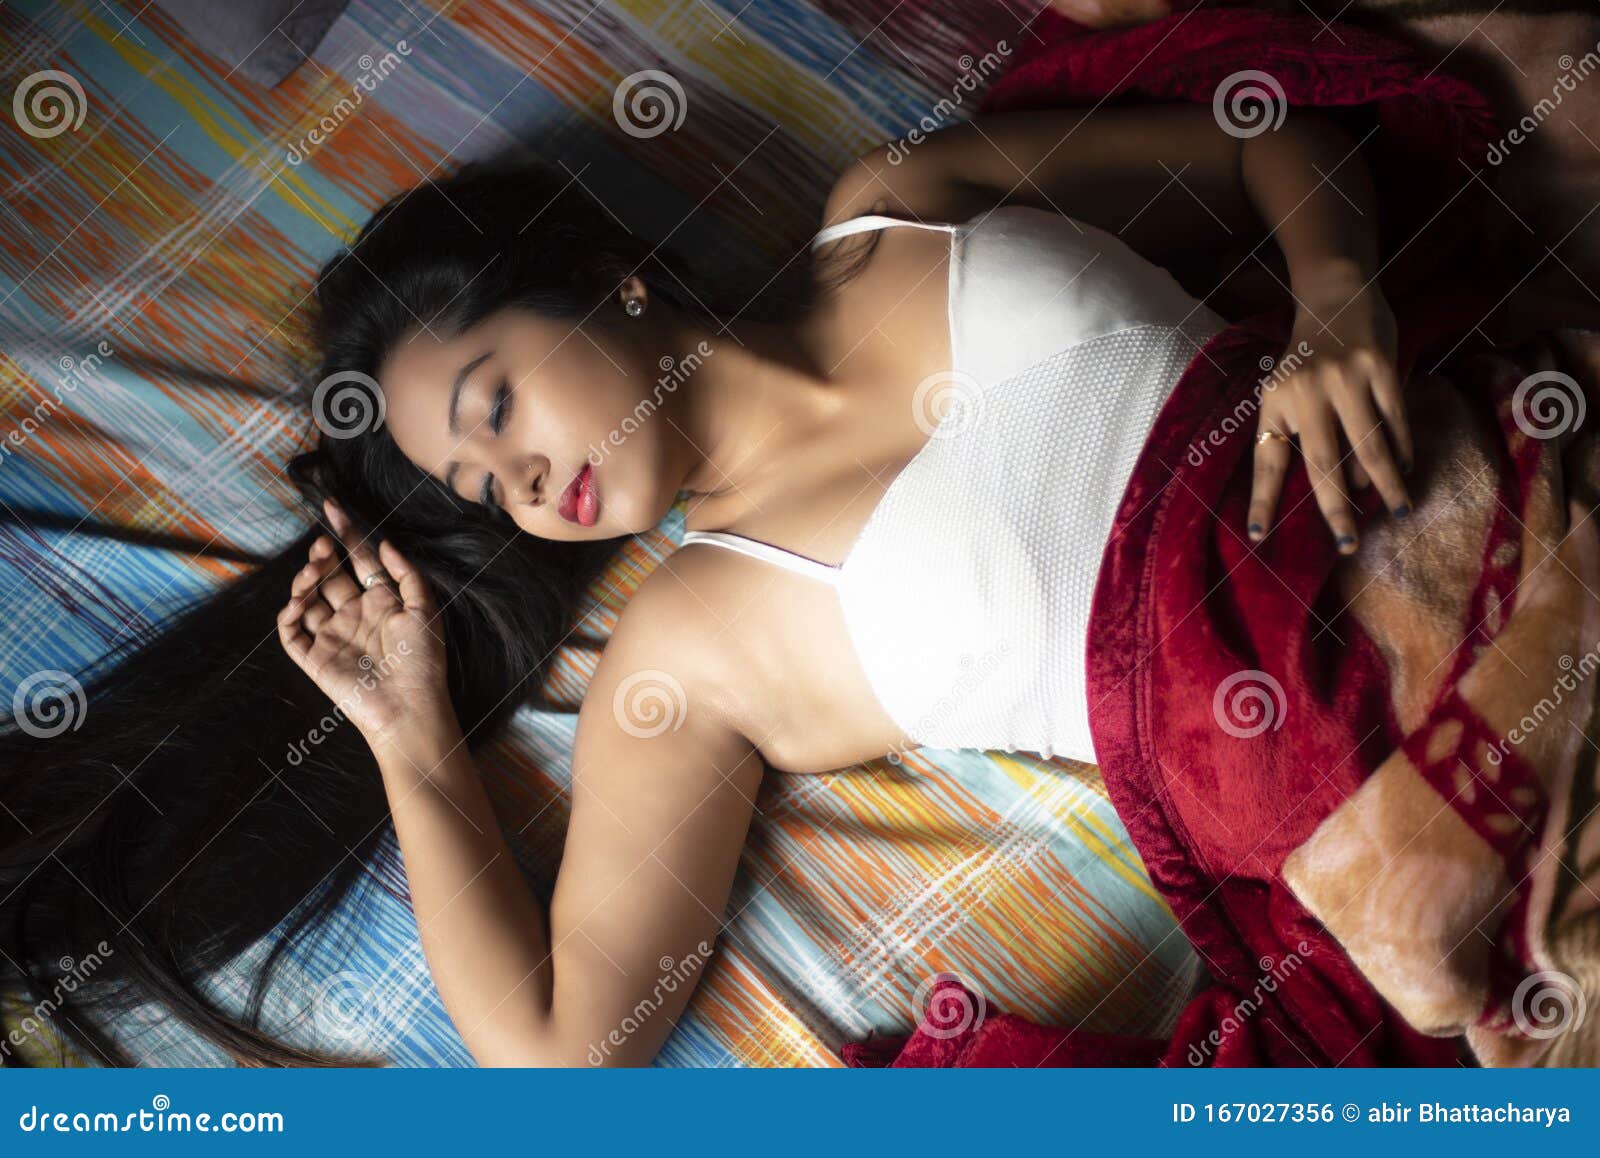 Young Indian Brunette Woman in Sleeping Wear Lying on a Bed Stock Photo photo